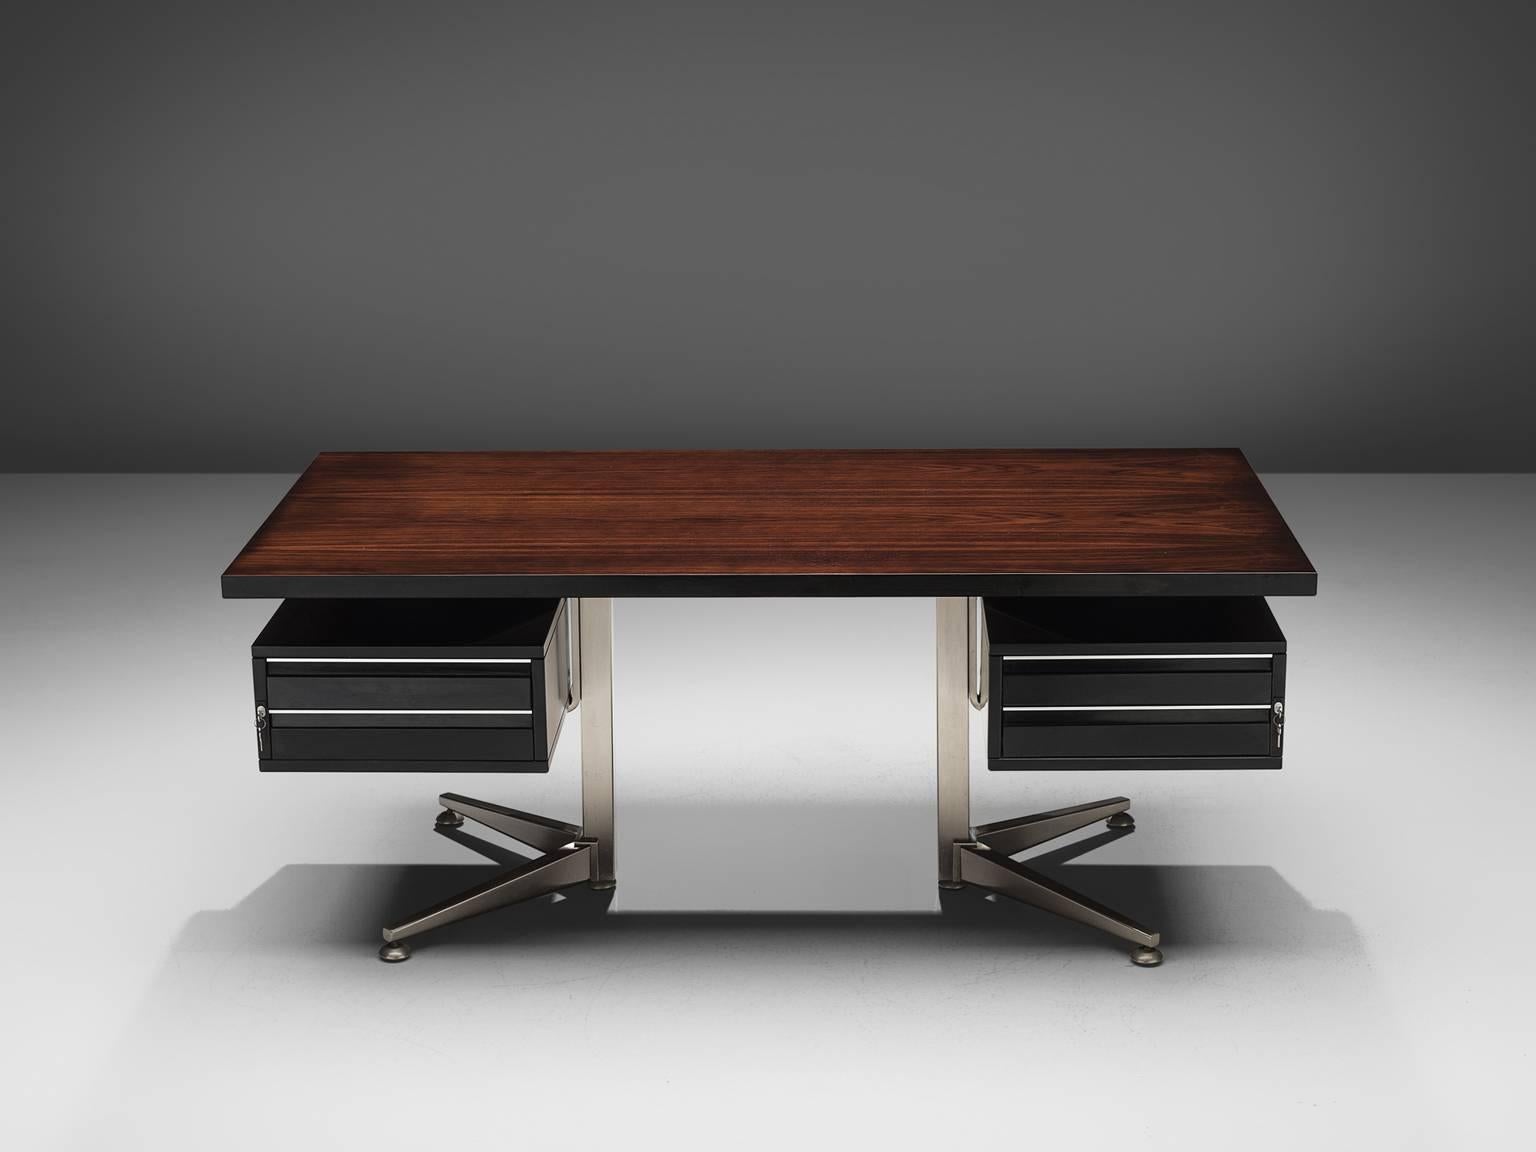 Abbondinterni, desk, rosewood and aluminium, Italy, 1960s.

Italian desk with a clean, rectangular top and a an aluminium frame. Both sides of the desks are equipped with drawers. The wood holds a deep ruby brown colour which forms a nice contrast